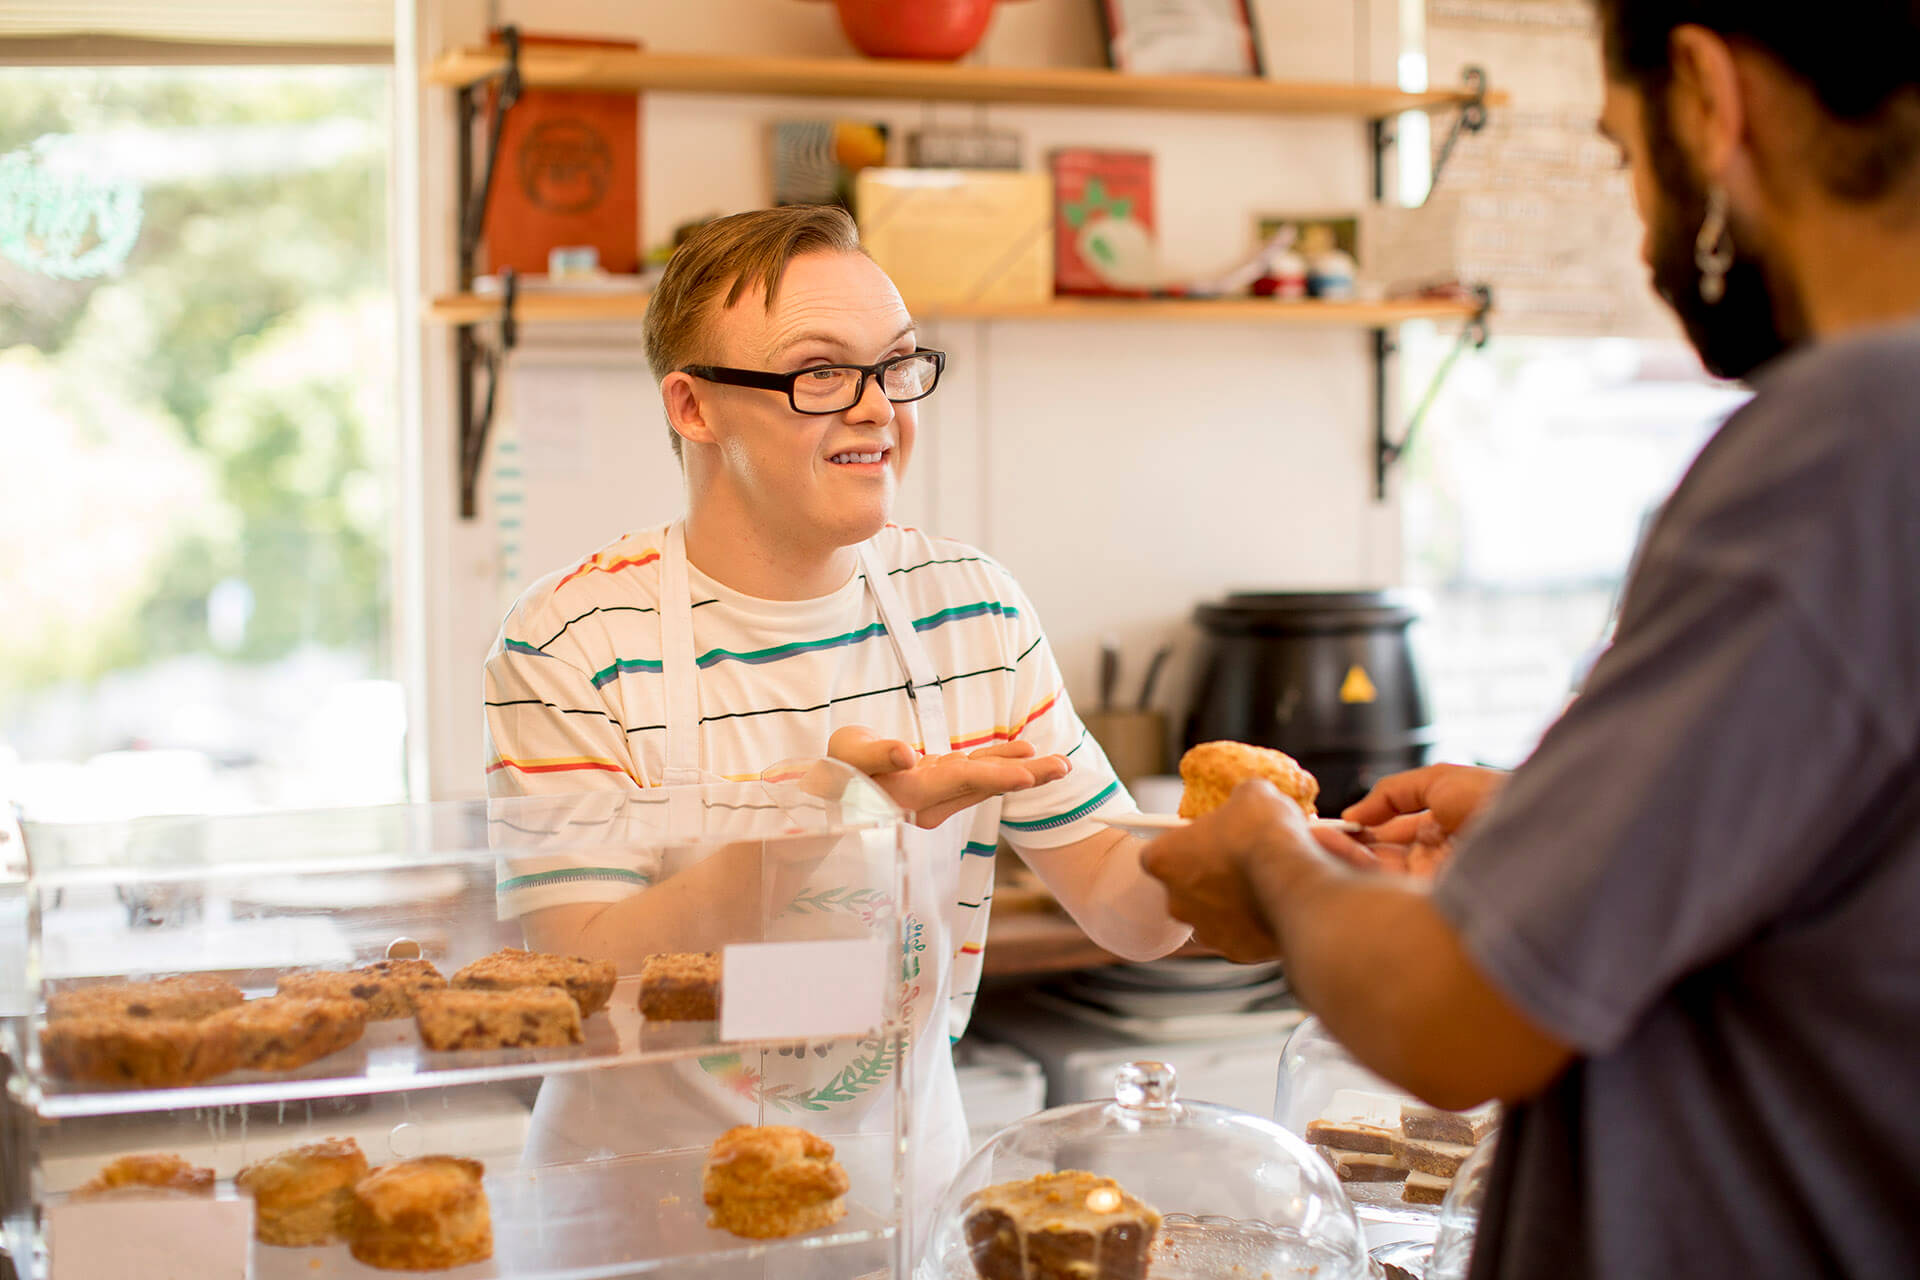 A staff member with disability serves a customer in a bakery